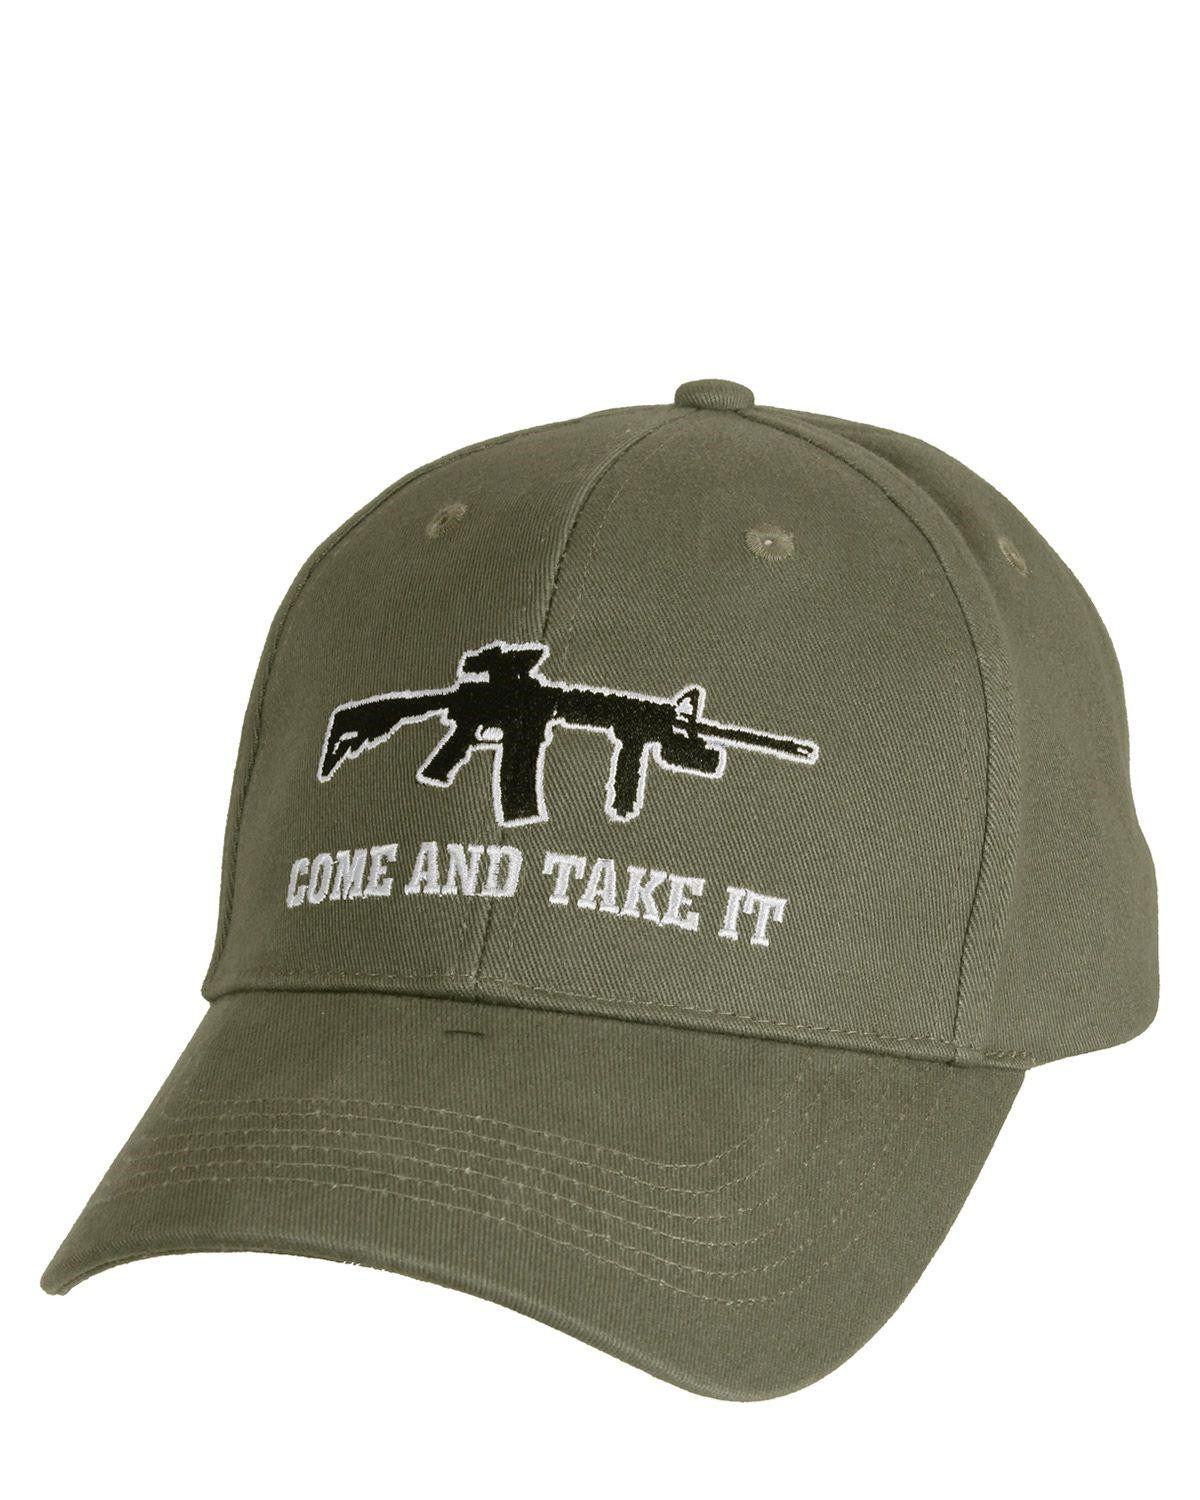 Rothco Deluxe Baseball Cap - 'Come and Take It' (Oliven, One Size)